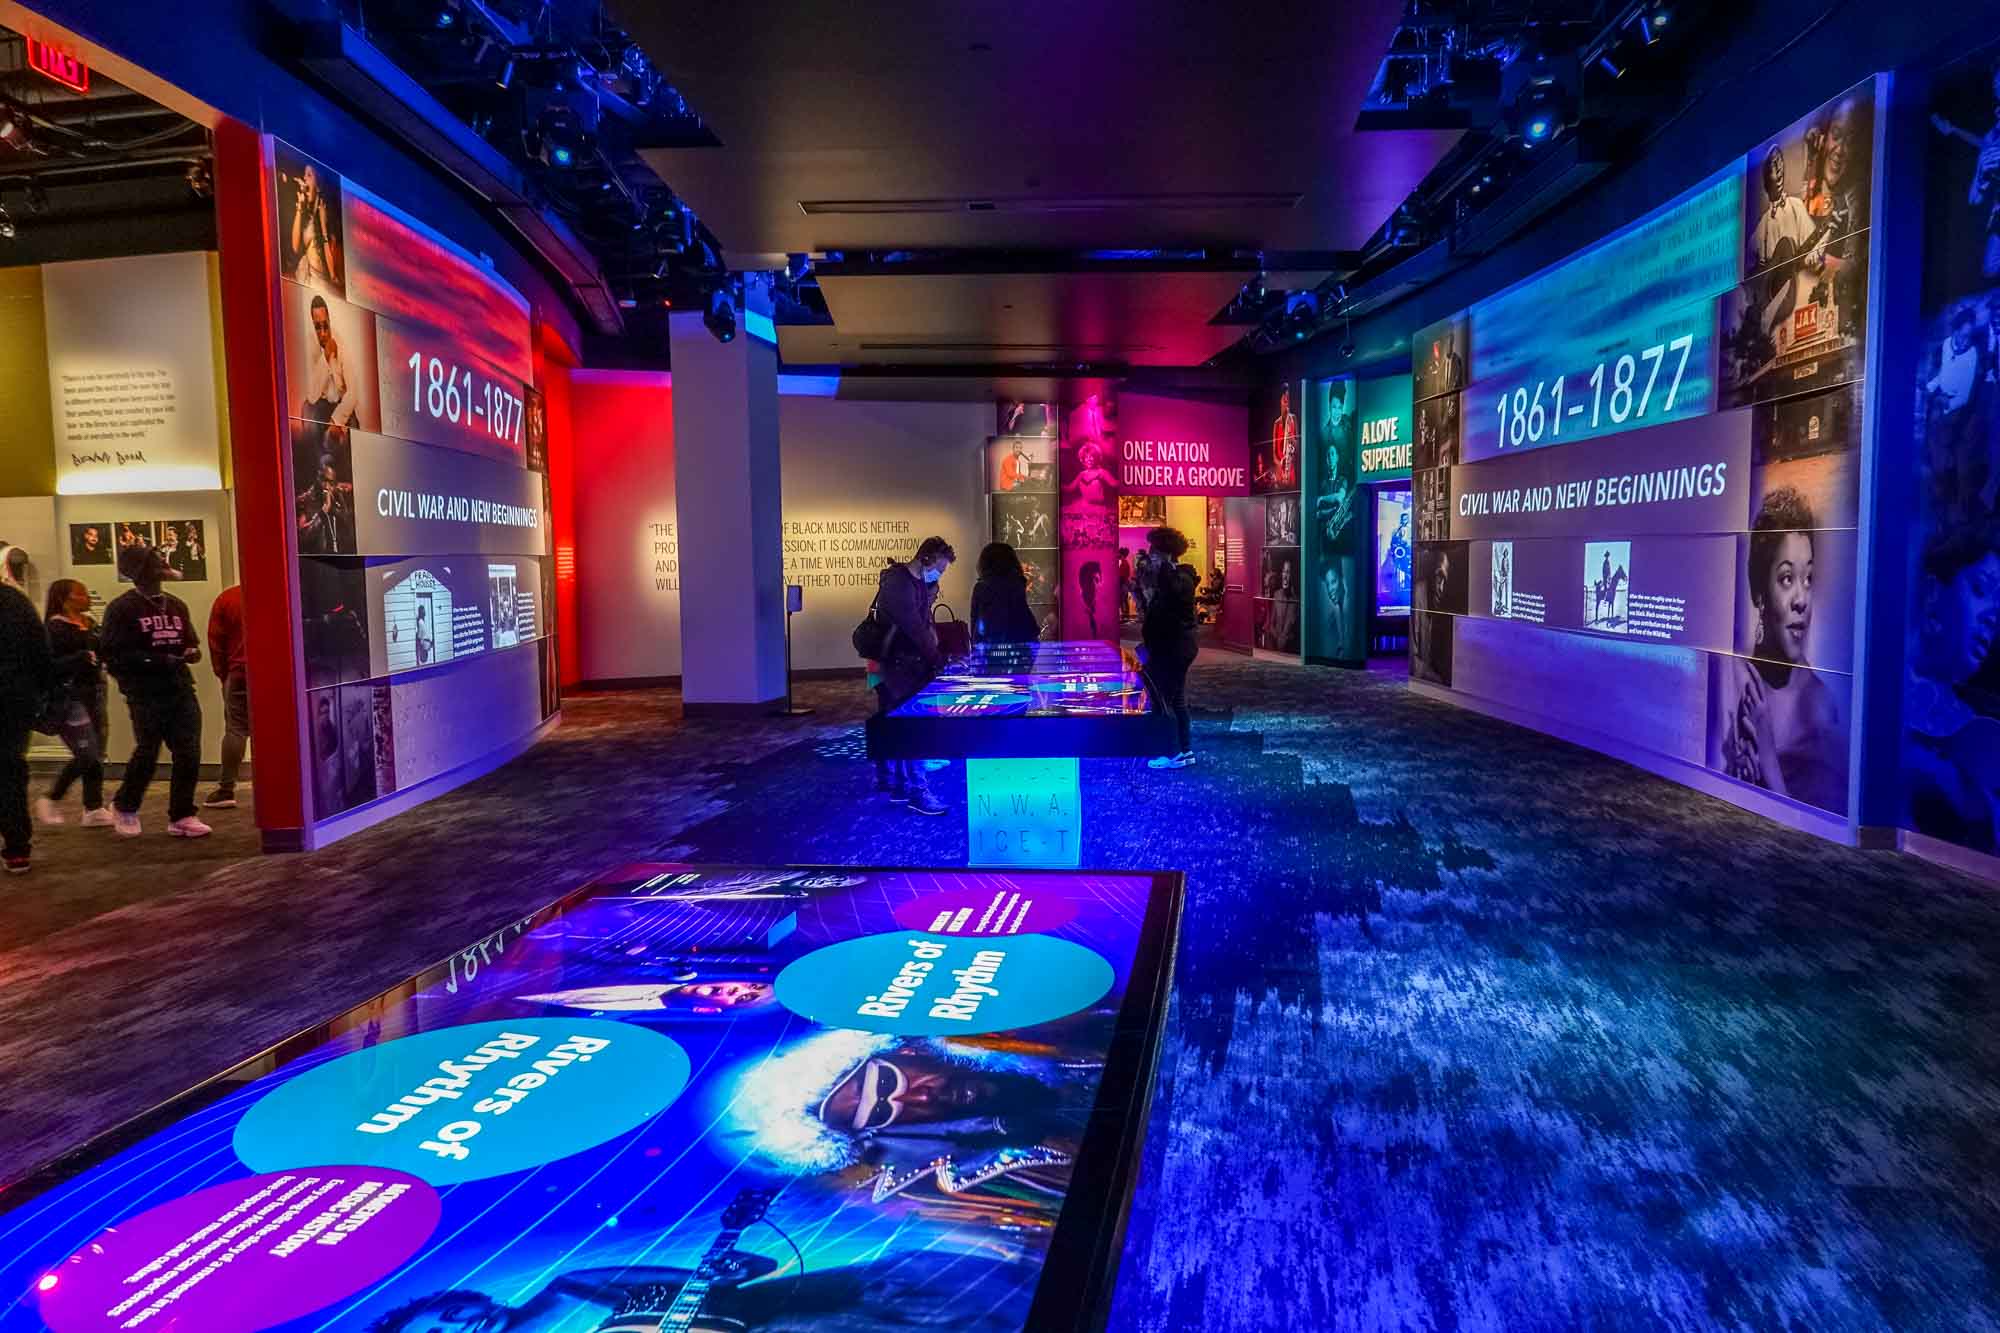 People standing at illuminated tables in a dark room filled with colorful, lit up exhibits.